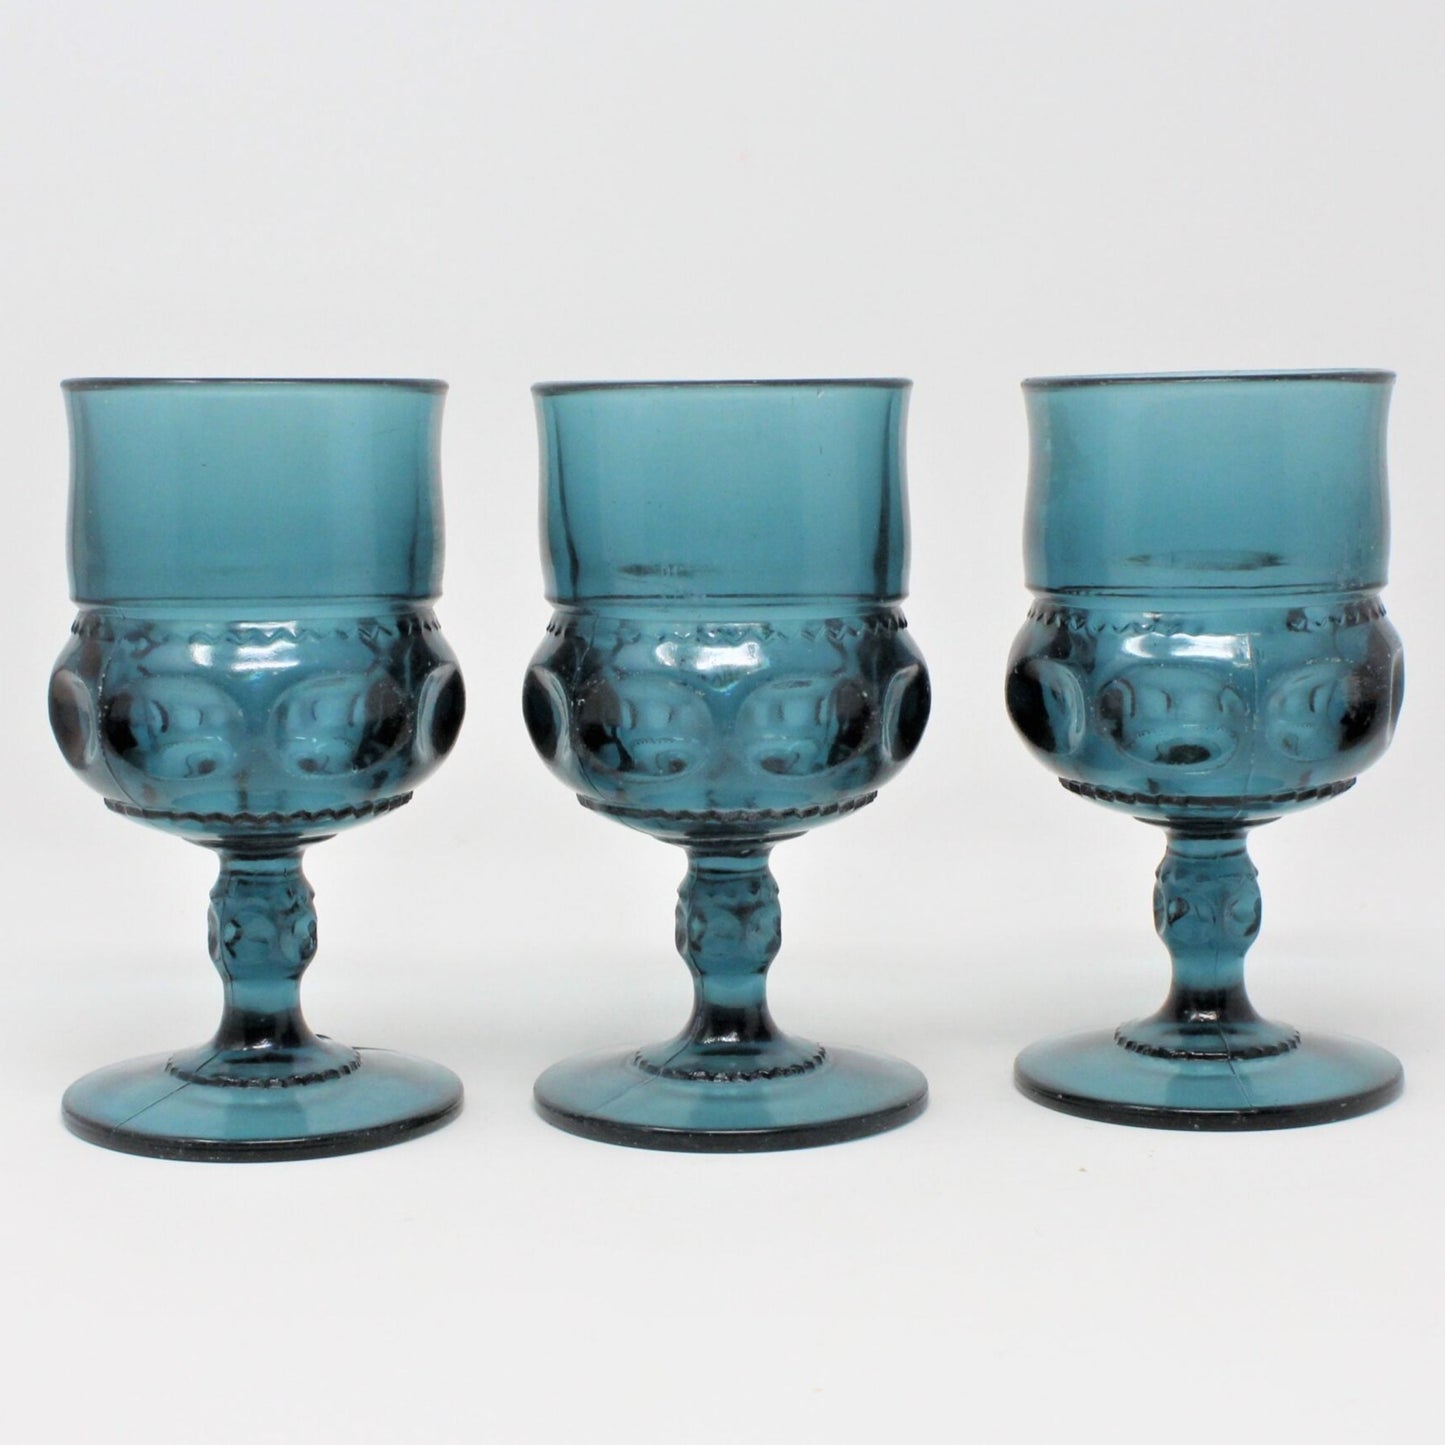 Water Goblets, Tiffin, King's Crown Blue, Set of 3, Vintage (Issues)